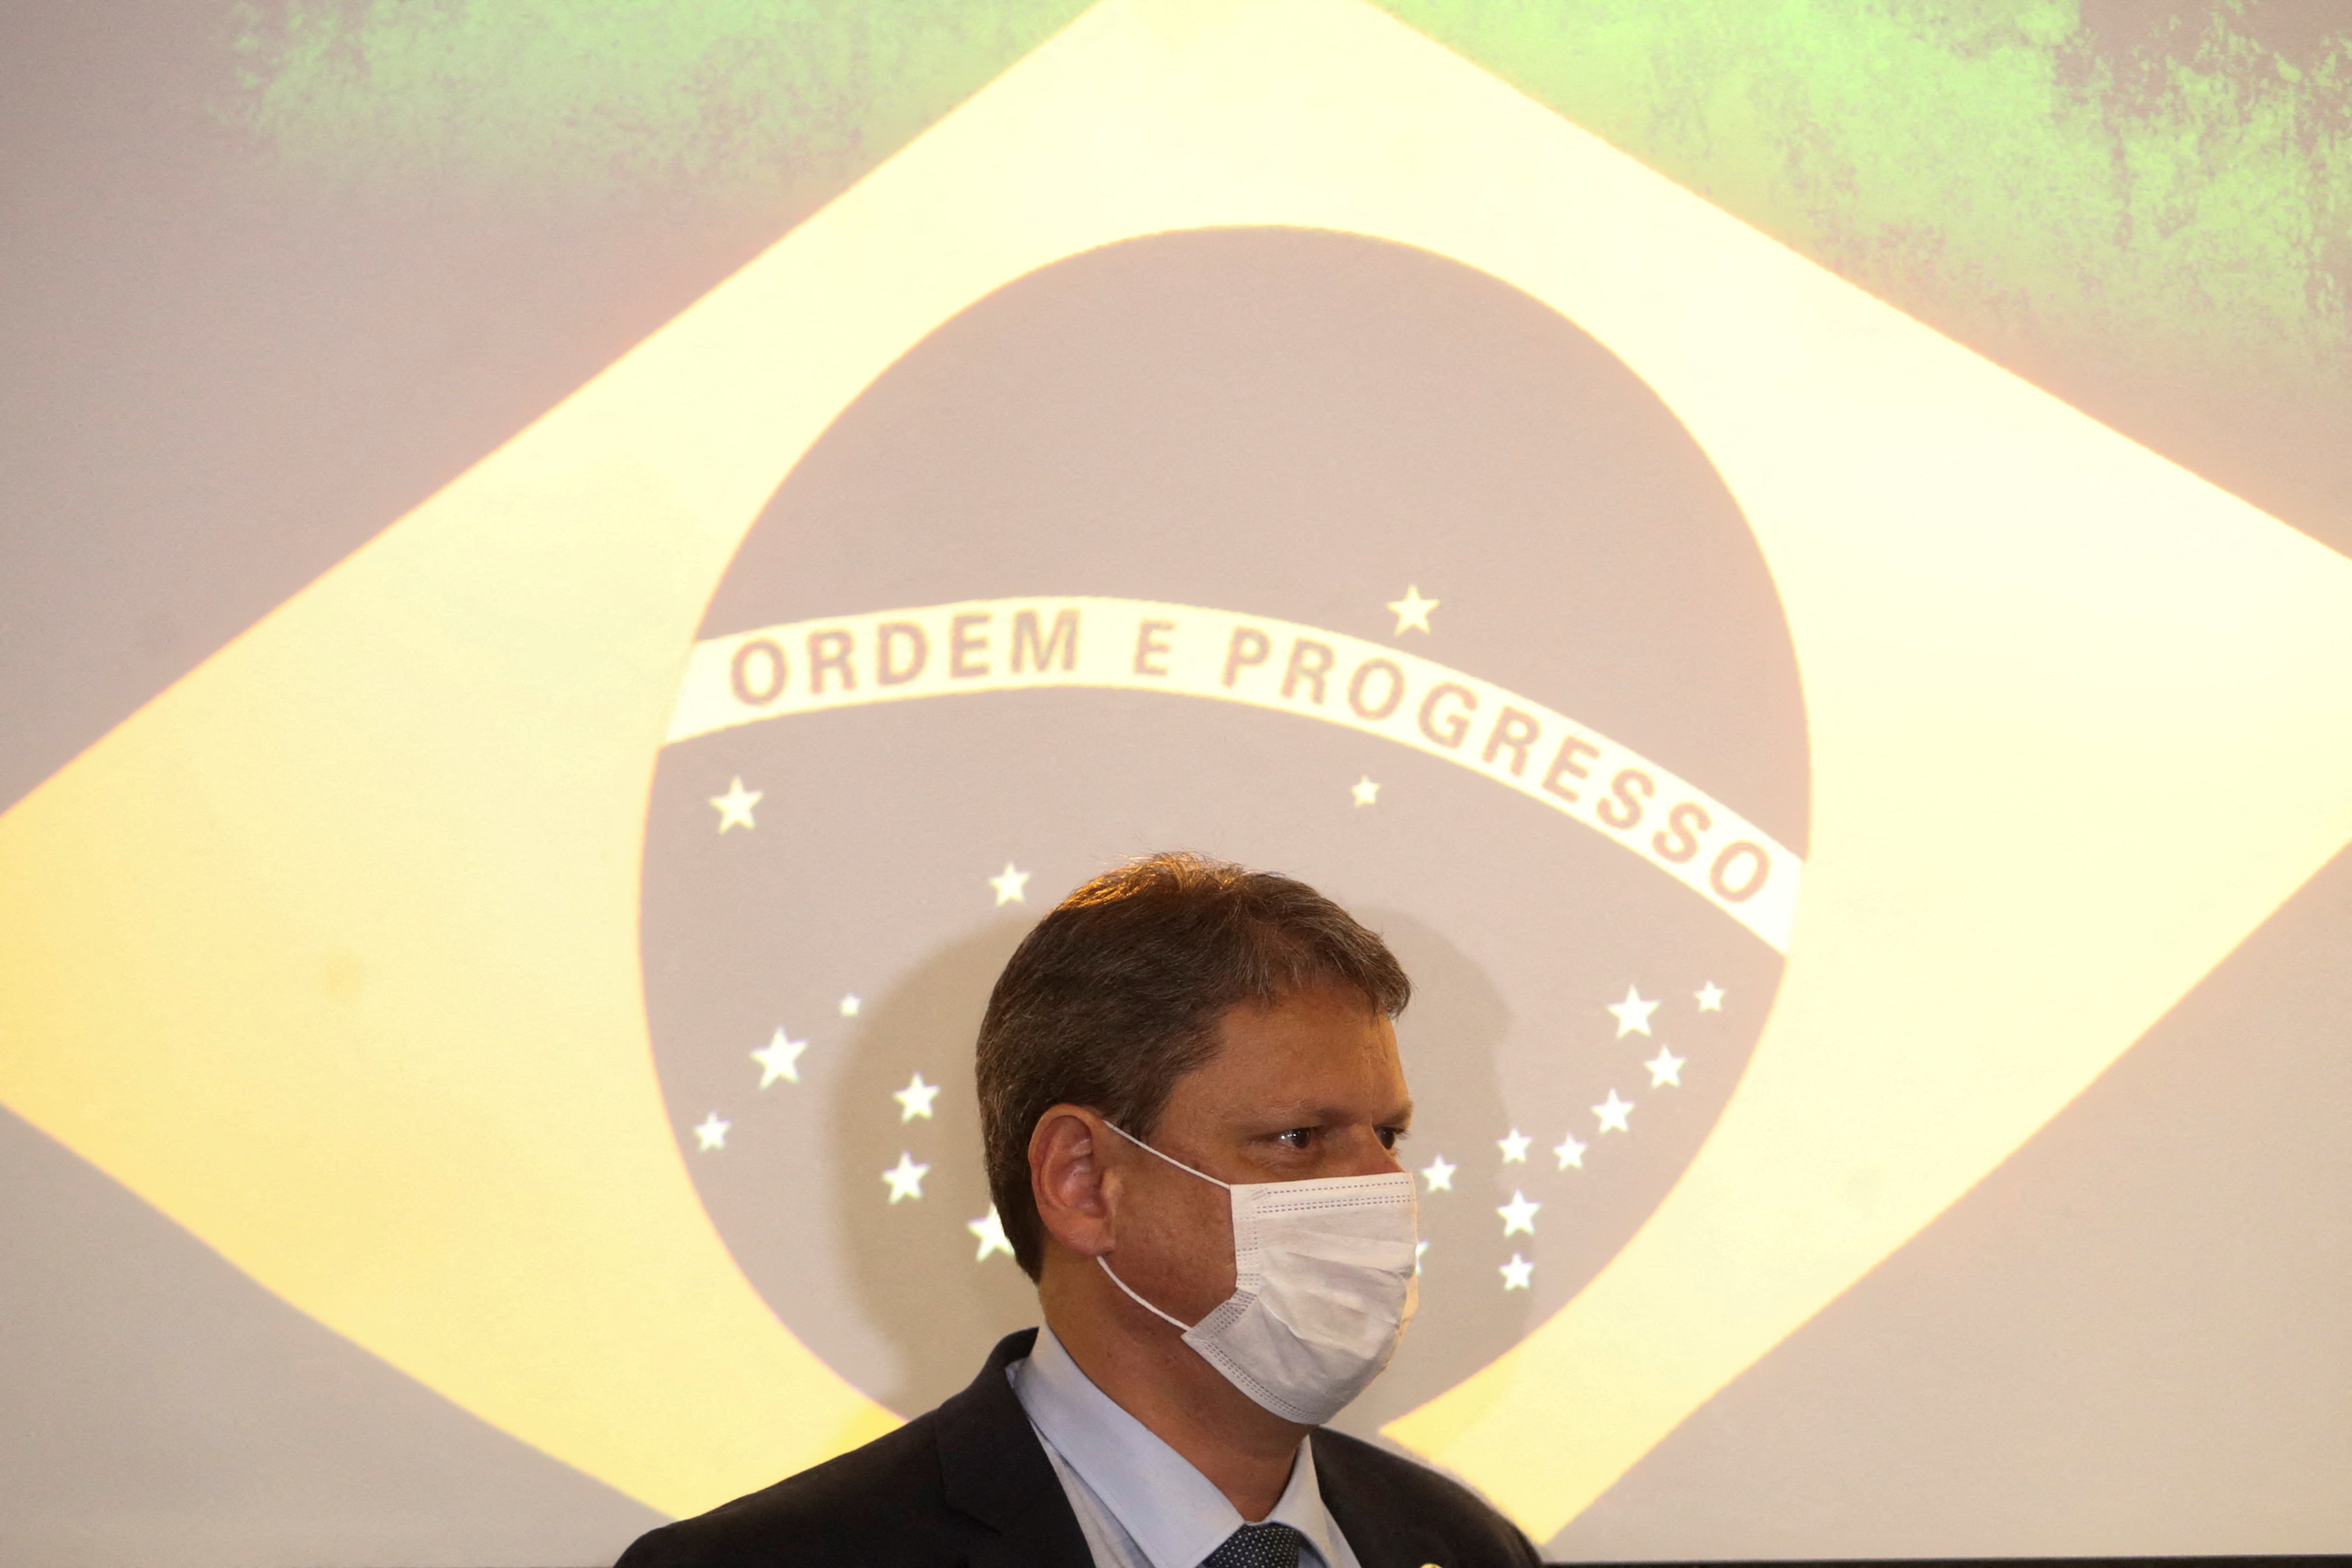 Brazil's Minister of Infrastructure Tarcisio Gomes de Freitas walks past a projection of the Brazilian flag during a press conference at Federation of Industries of the State of Sao Paulo (FIESP) in Sao Paulo